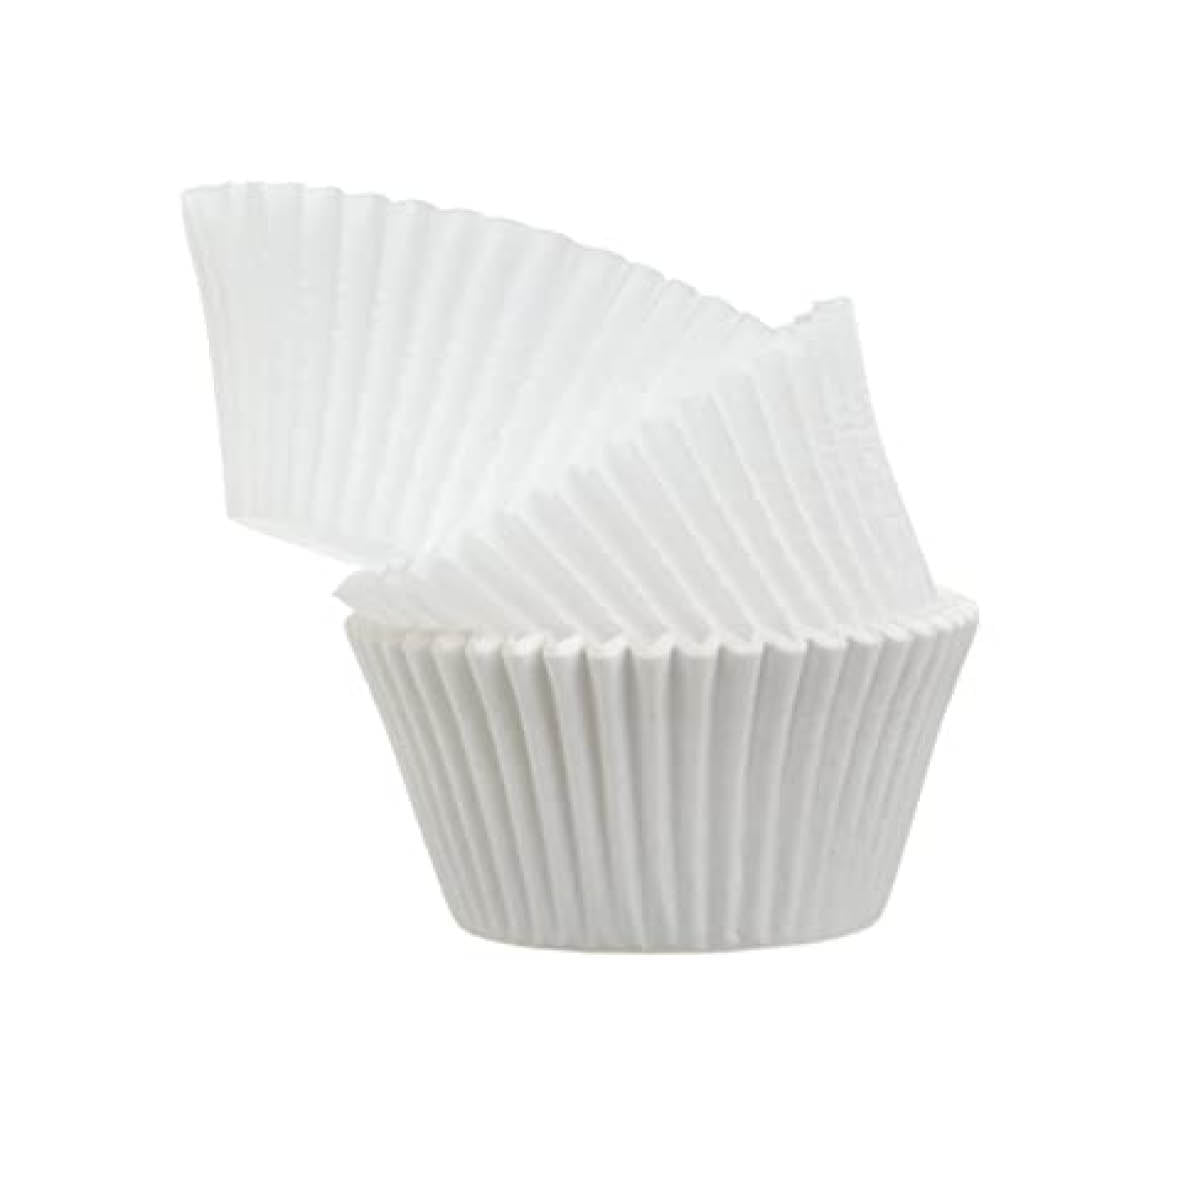 NN Baking cups Large, 50ct